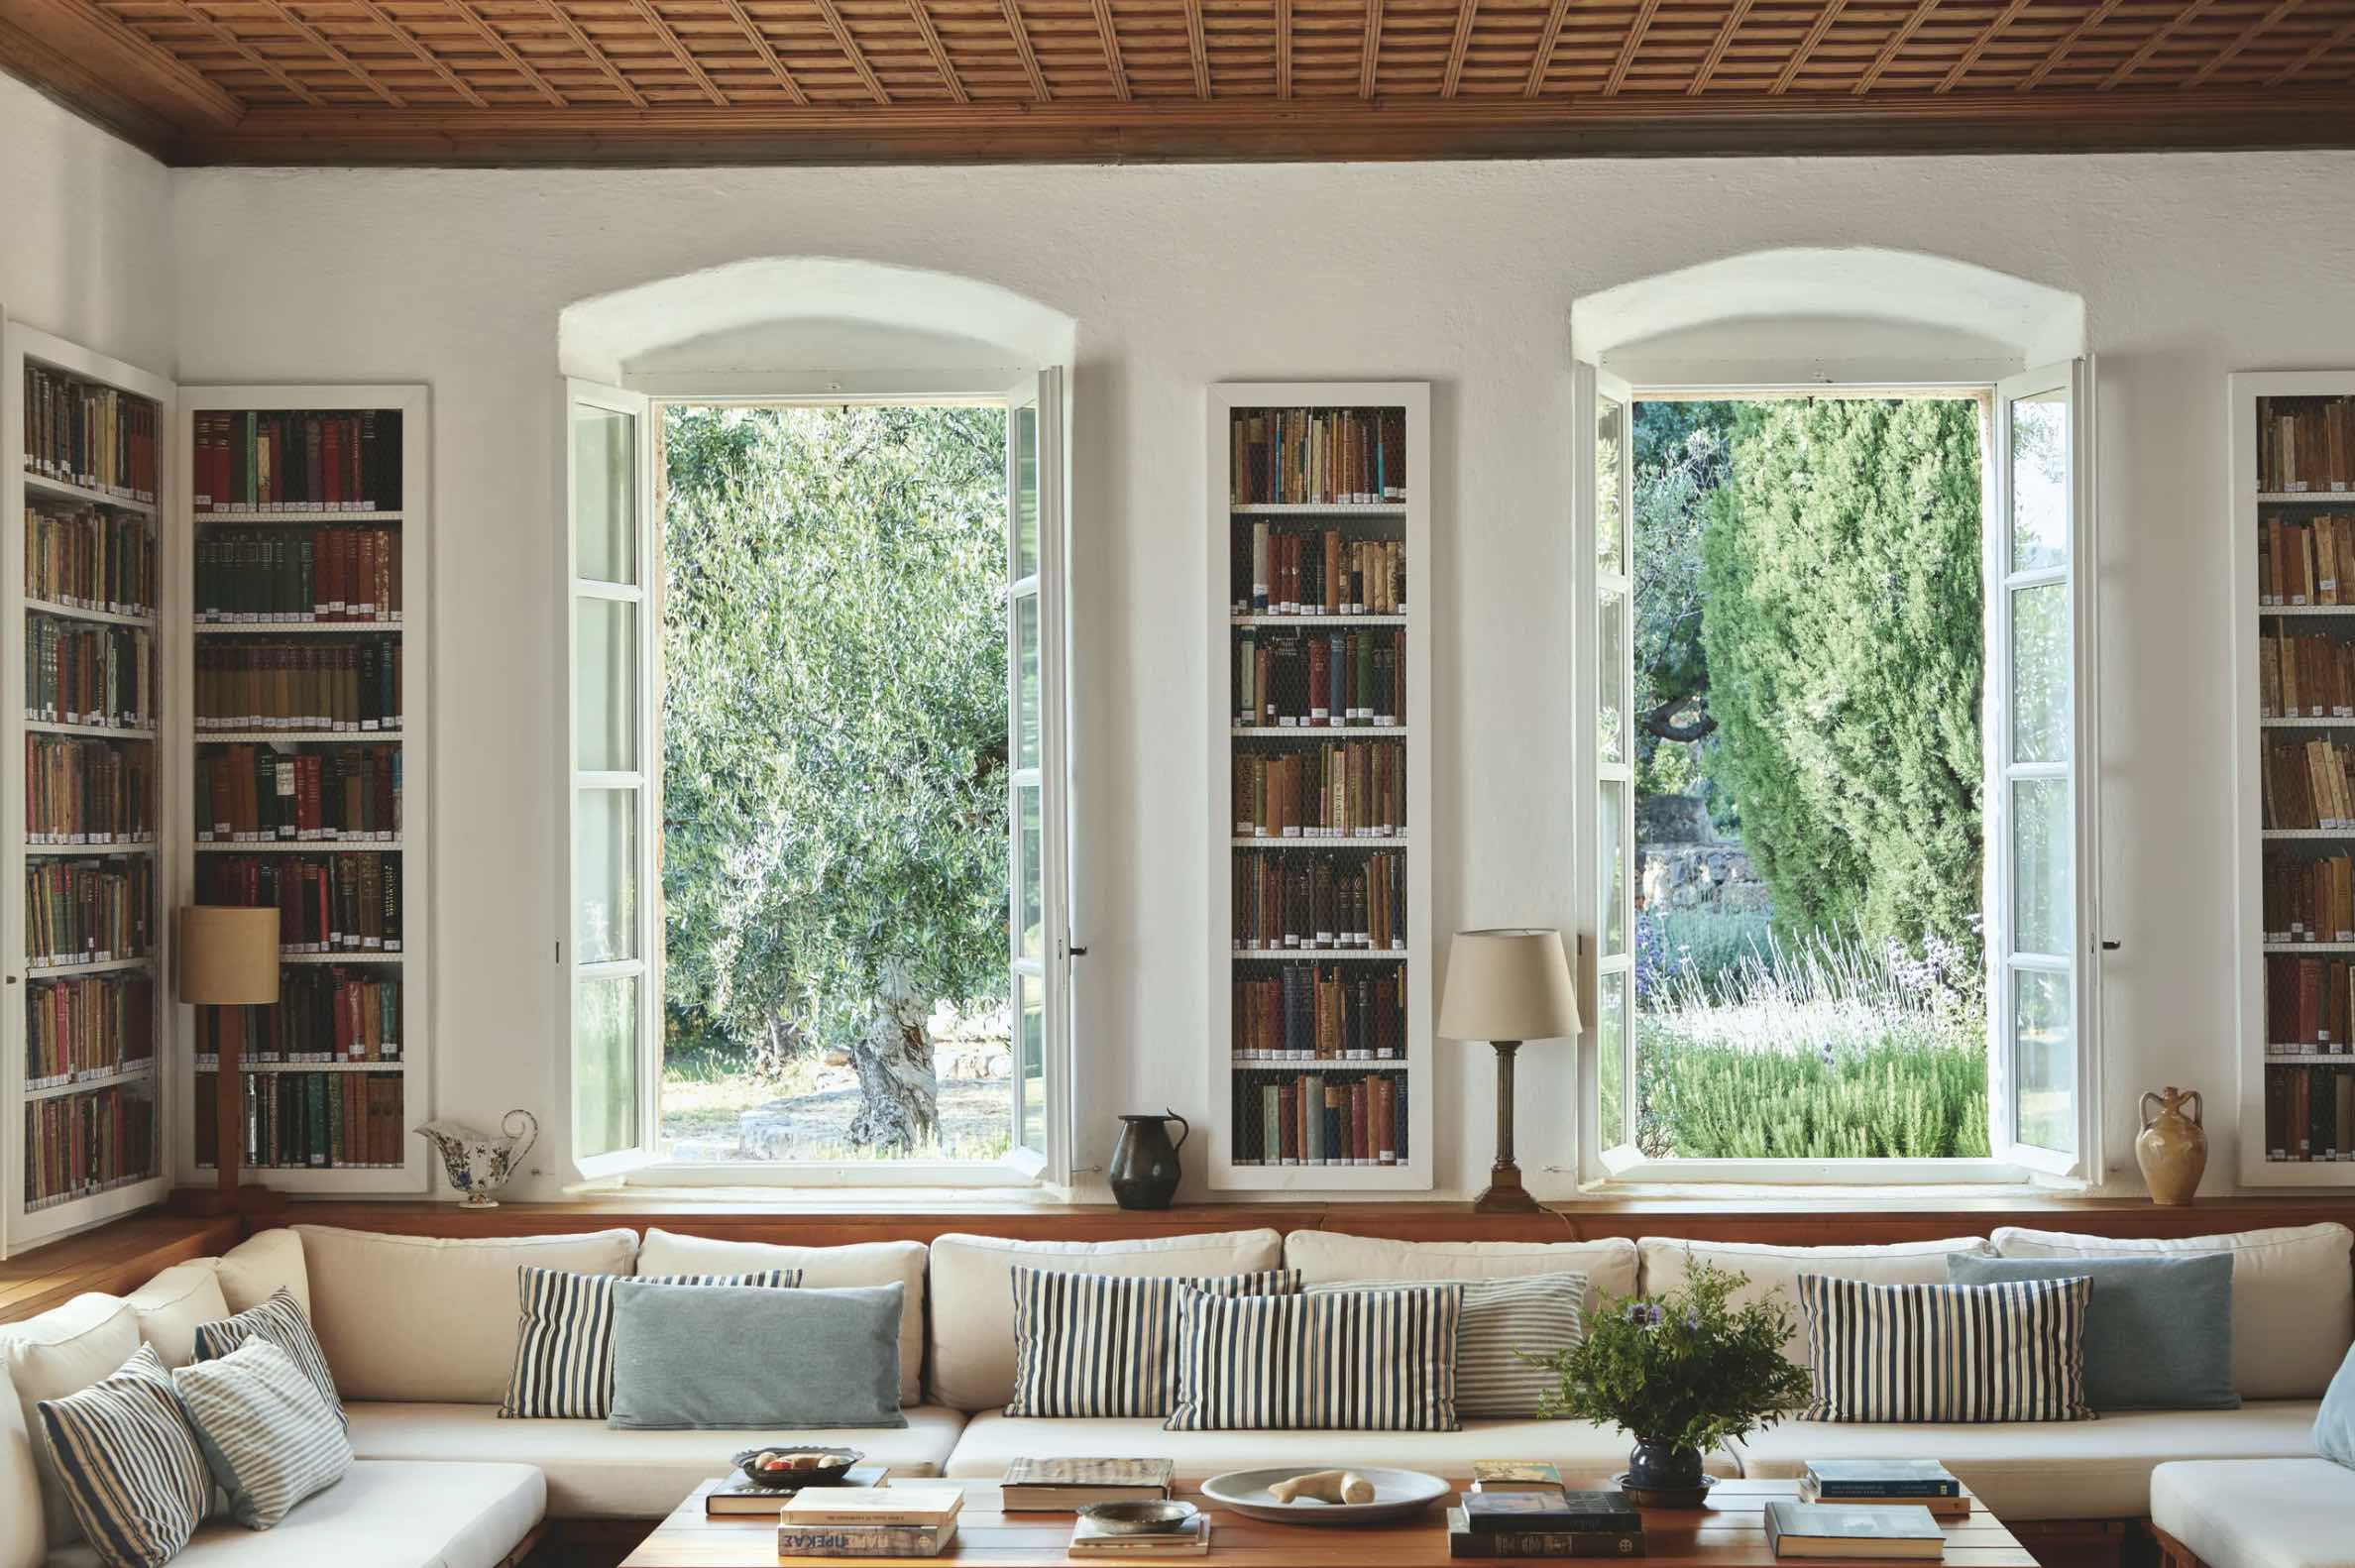 House of the Month: 3 Issues I Love About This Heat and Serene Greek Home | Wit & Delight